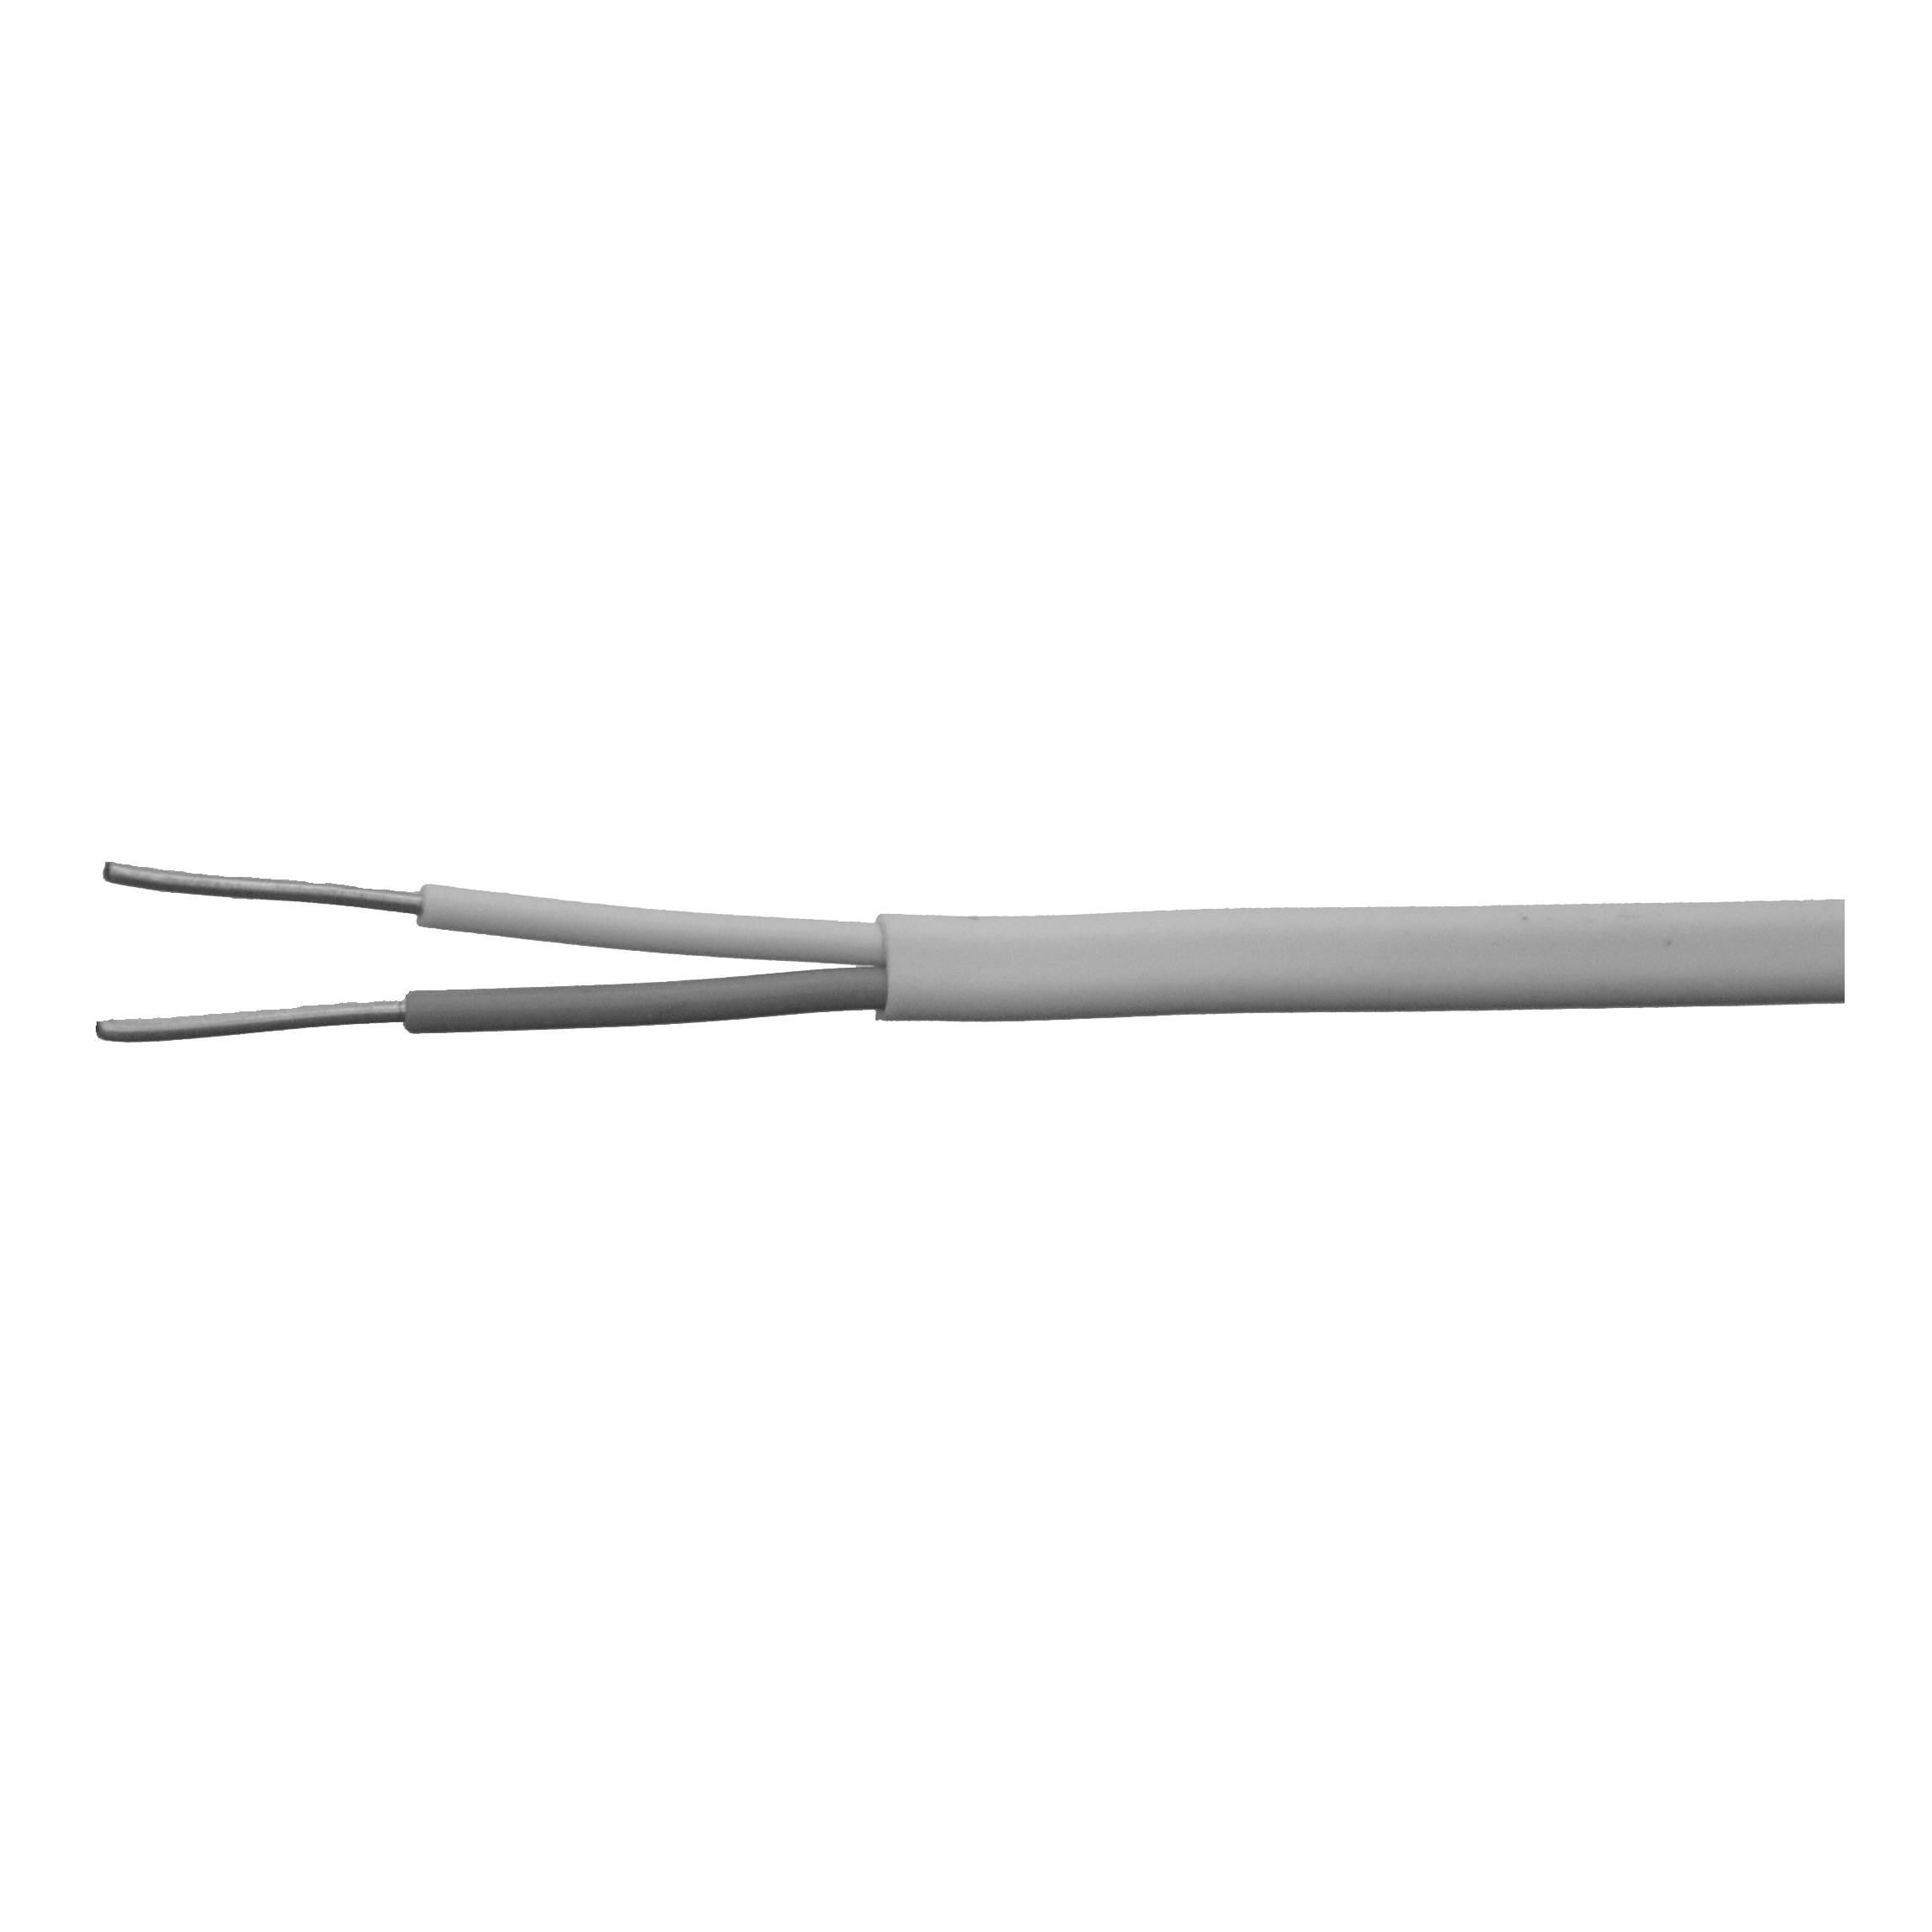 Omni Cable I32002-KX Type PLTC Shielded Thermocouple Cable, 300 VAC, (2) 20 AWG Solid Conductor